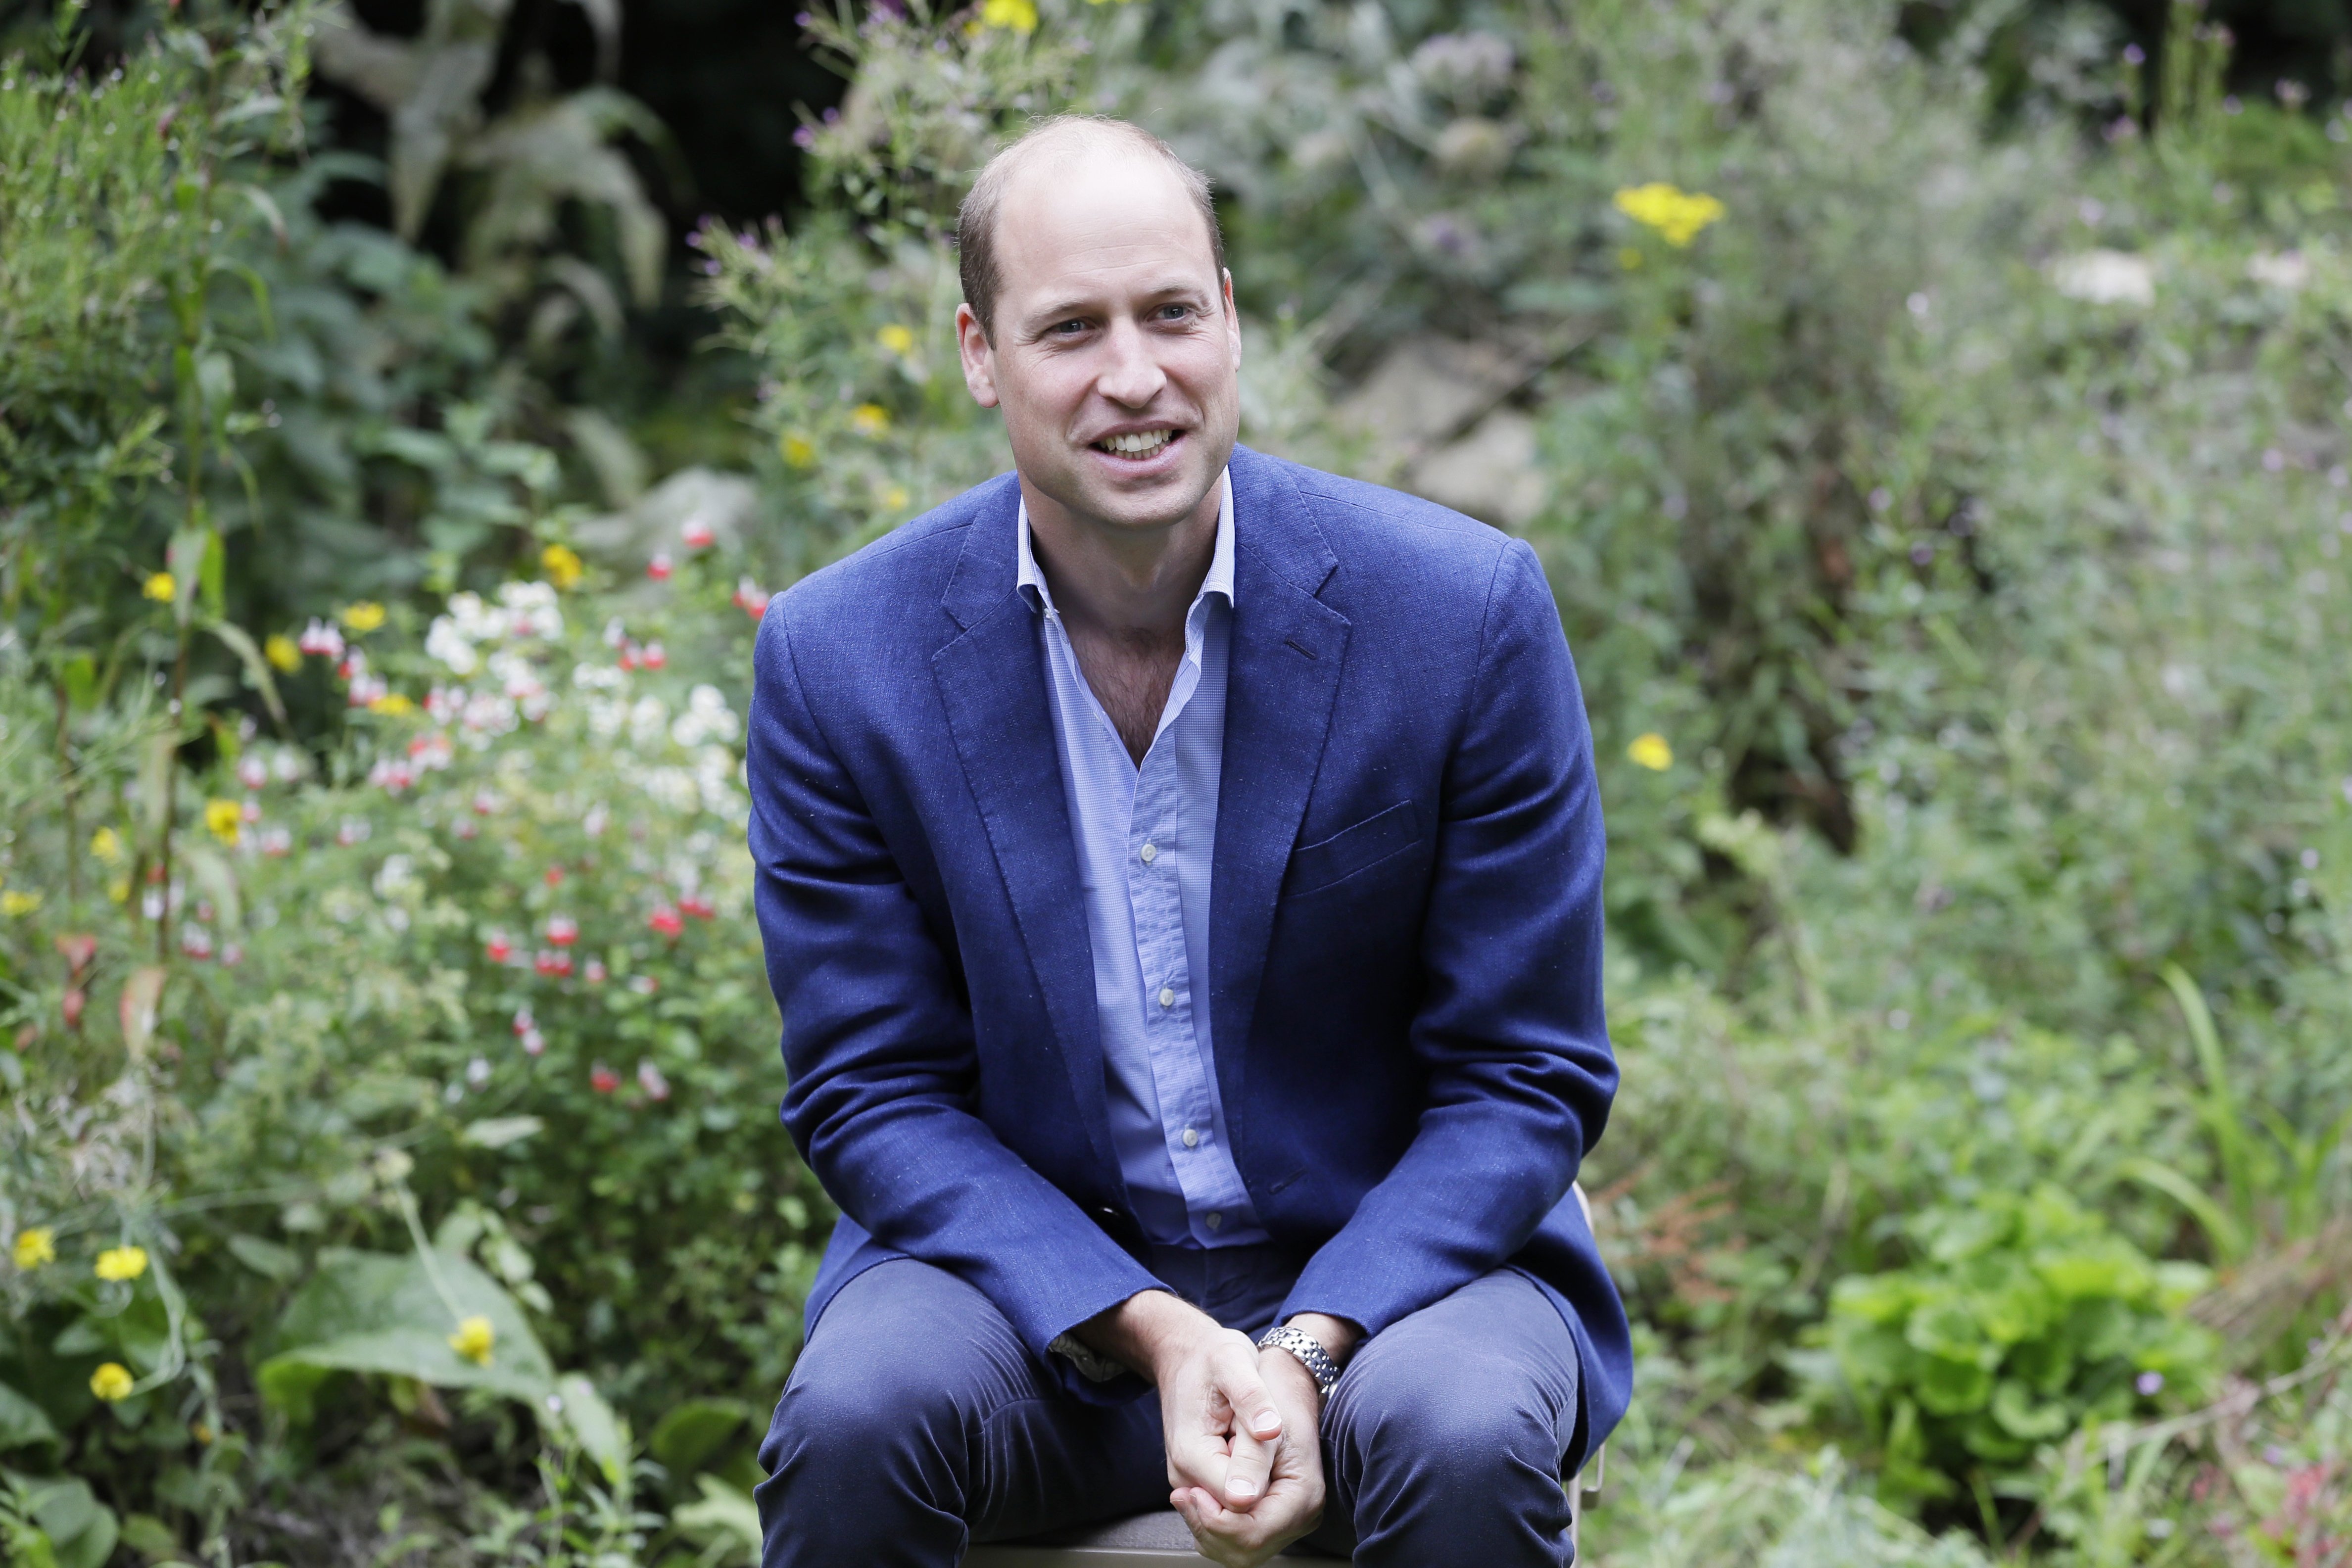 Prince William, Duke of Cambridge speaks with service users during a visit to the Garden House part of the Light Project on July 16, 2020 in Peterborough, England | Photo: Getty Images